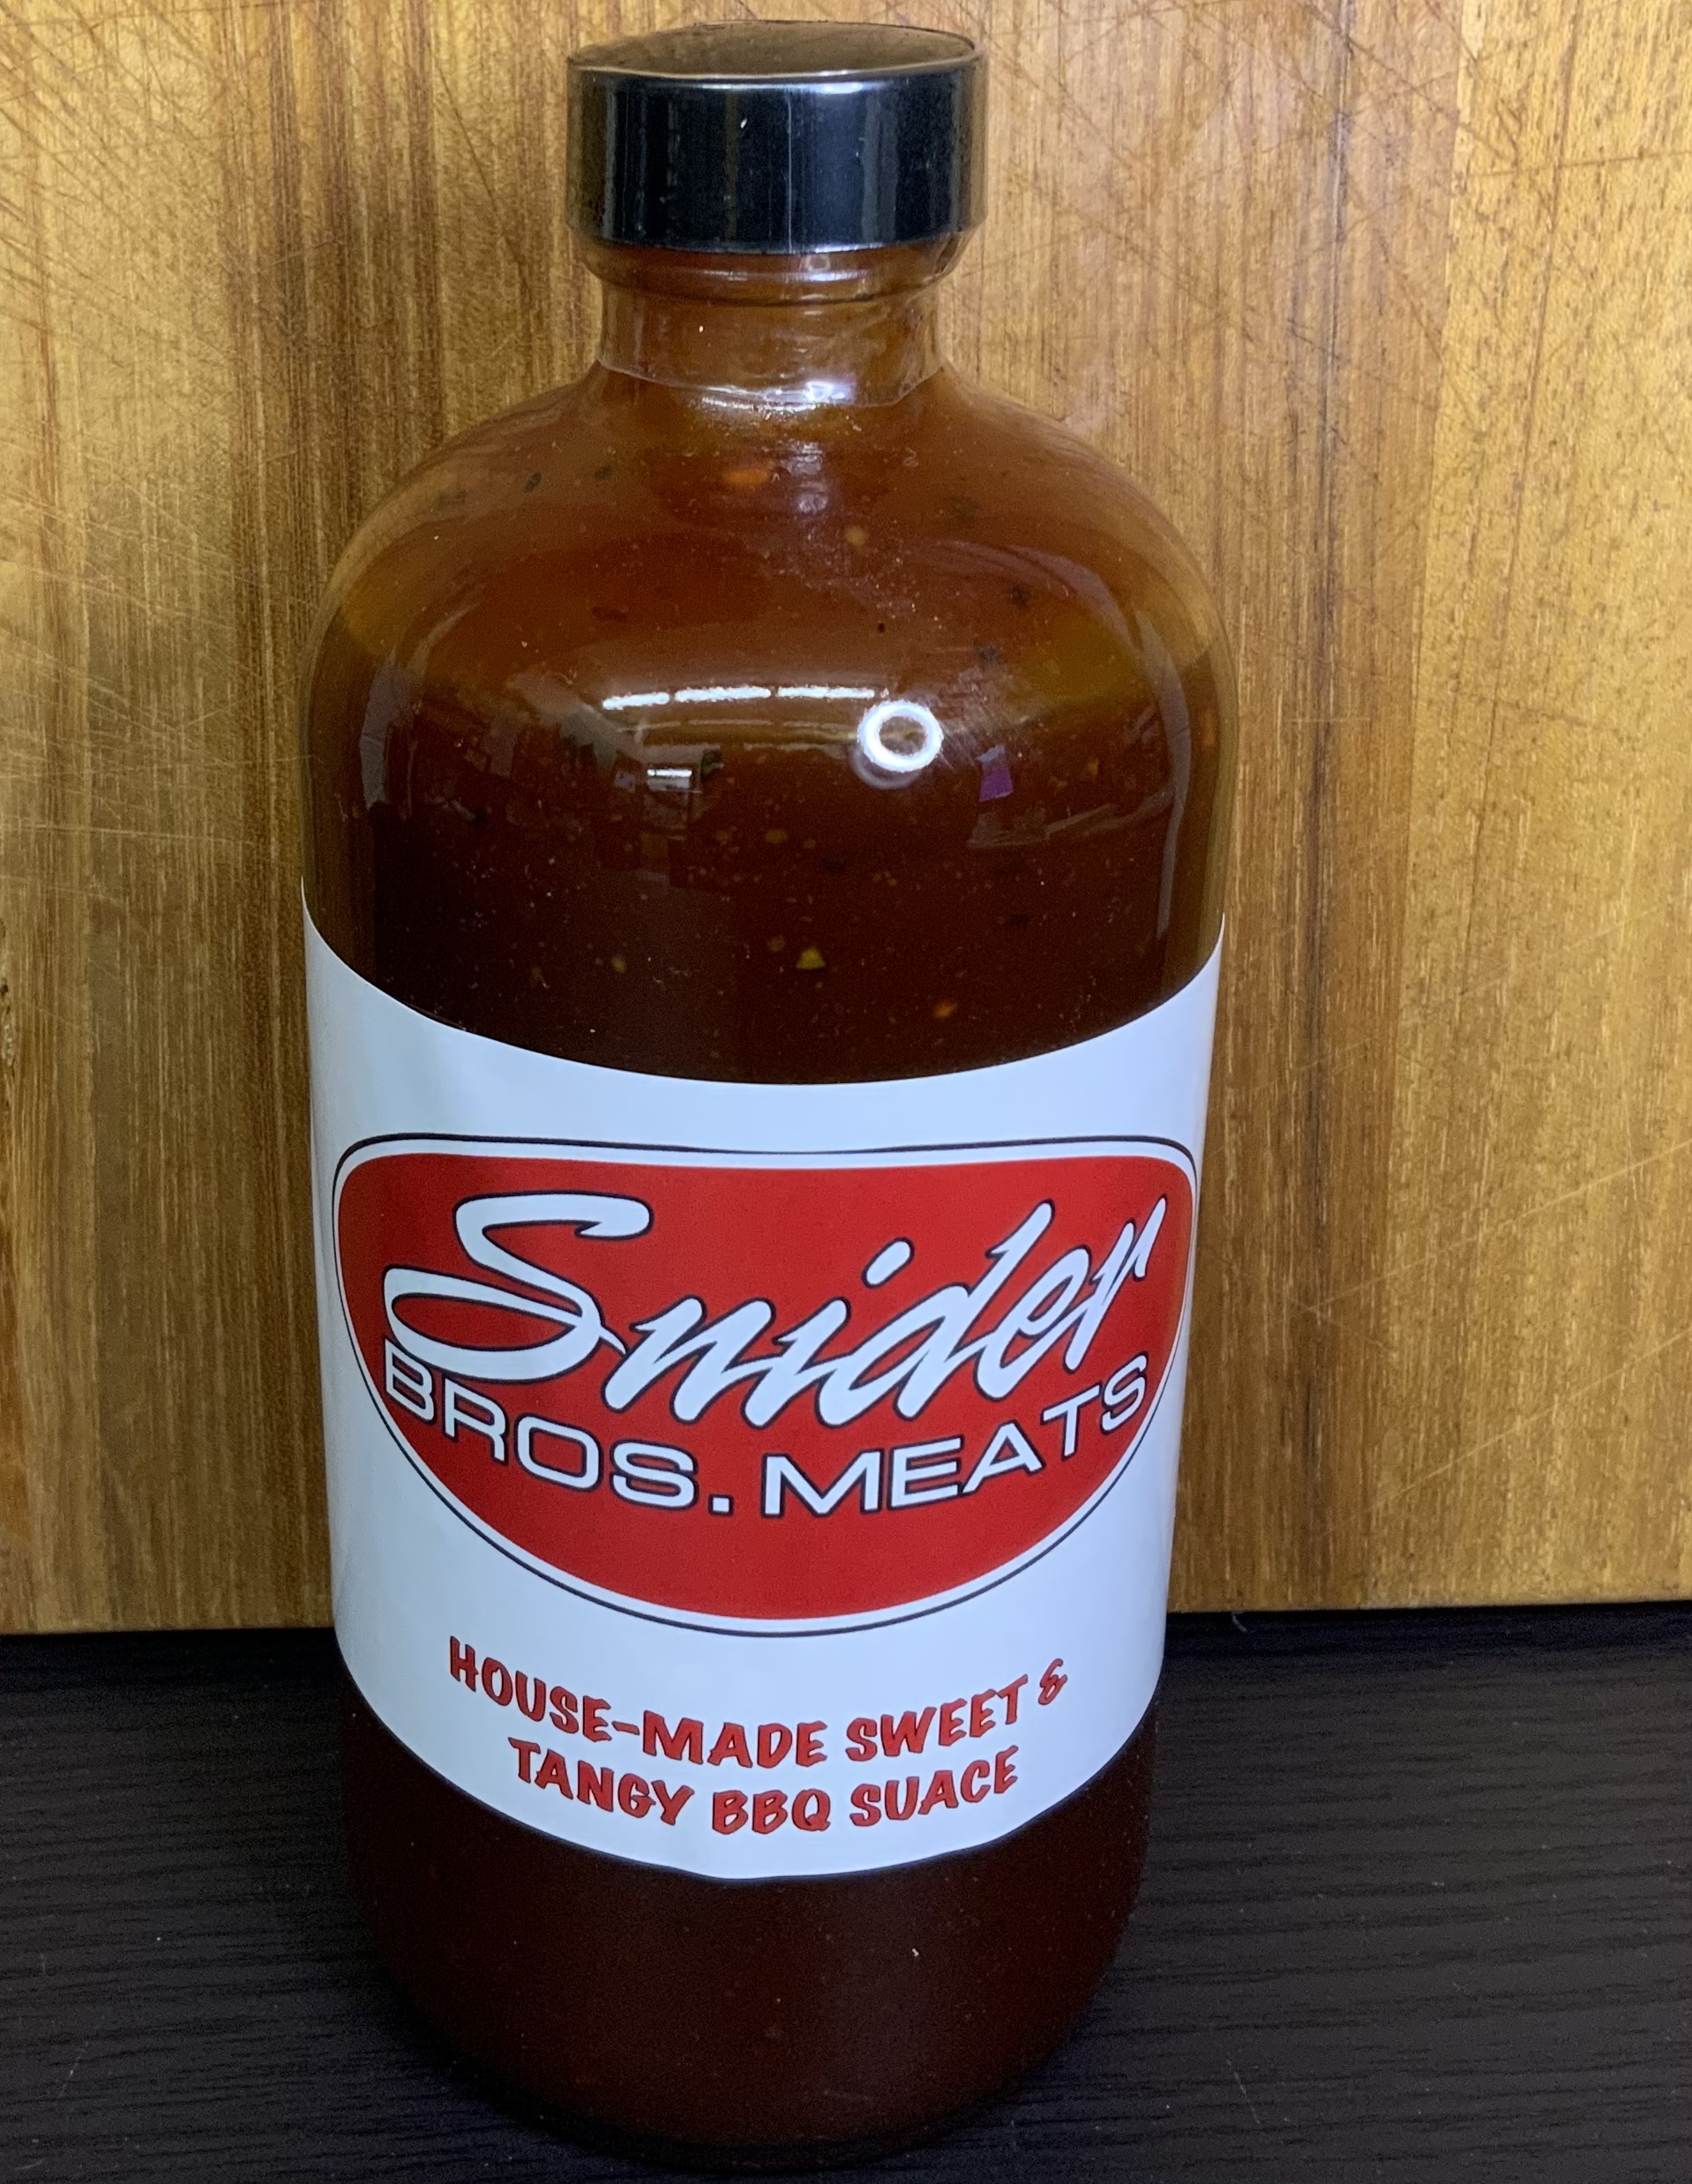 Snider’s Sweet & Tangy BBQ Sauce